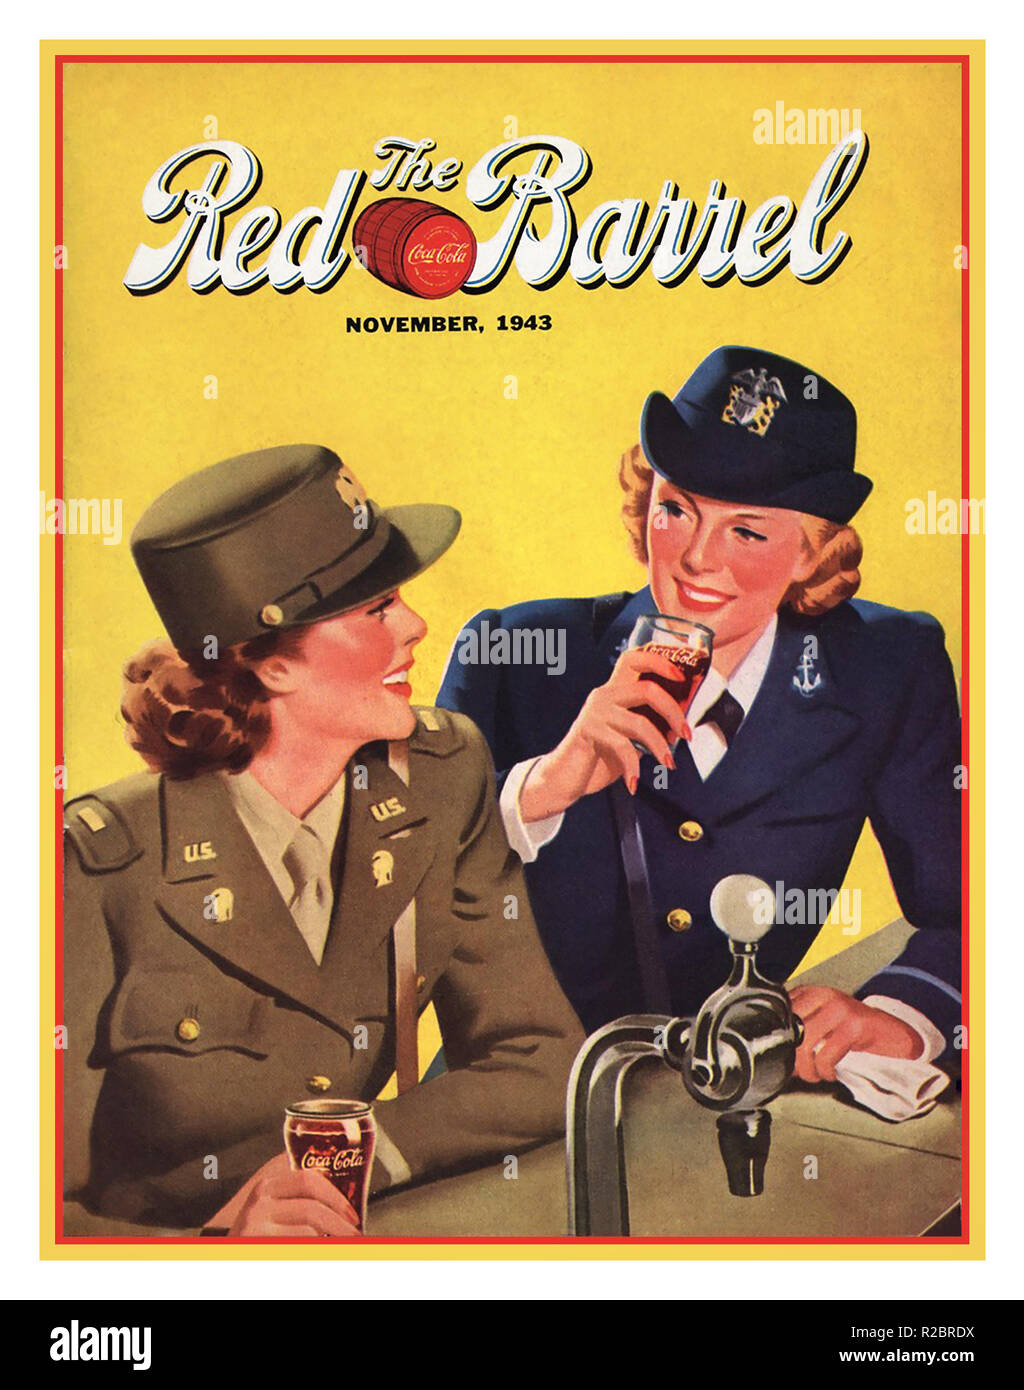 WW2 American Vintage Propaganda Advertising.. Service Women drinking Coca Cola wearing uniforms of US Army and  US Navy featuring on front cover of The Red Barrel, published by The Coca Cola Company “to develop and promote a higher coordination of the forces which make ‘Coca Cola’ an institution...”World War II Advertising Promotion November 1943 Stock Photo